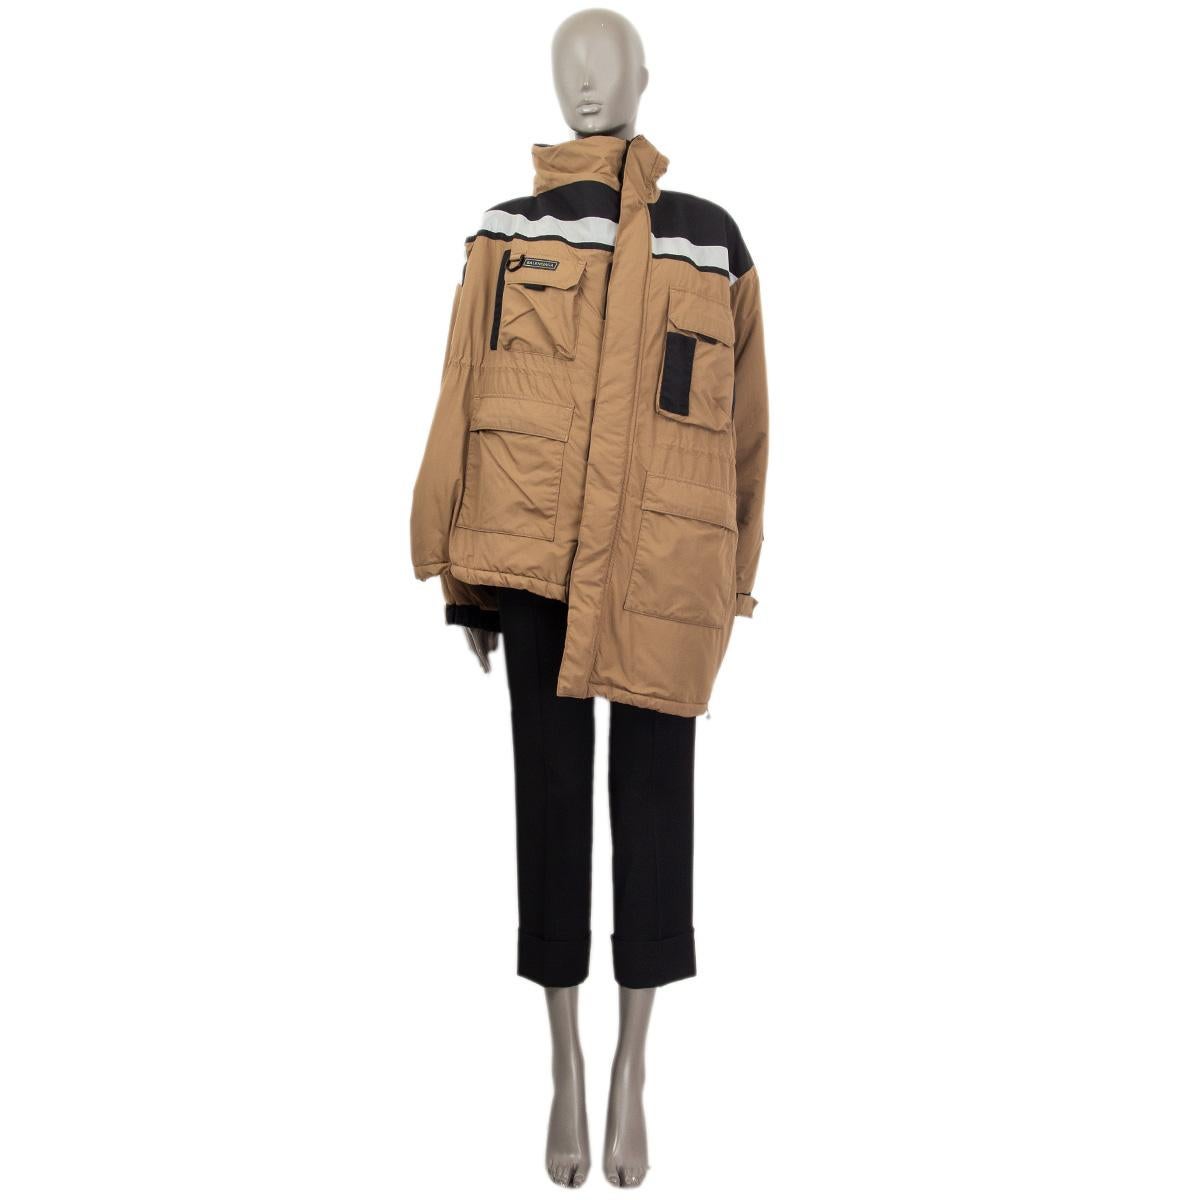 100% authentic Balenciaga asymmetric constructor style jacket in dark tan, black and silver nylone (100%) with a reflecting light strip. Has a stand-up collar, oversize fit and four patch pockets. Cuffs can be adjusted with Velcro fastener. Lined in